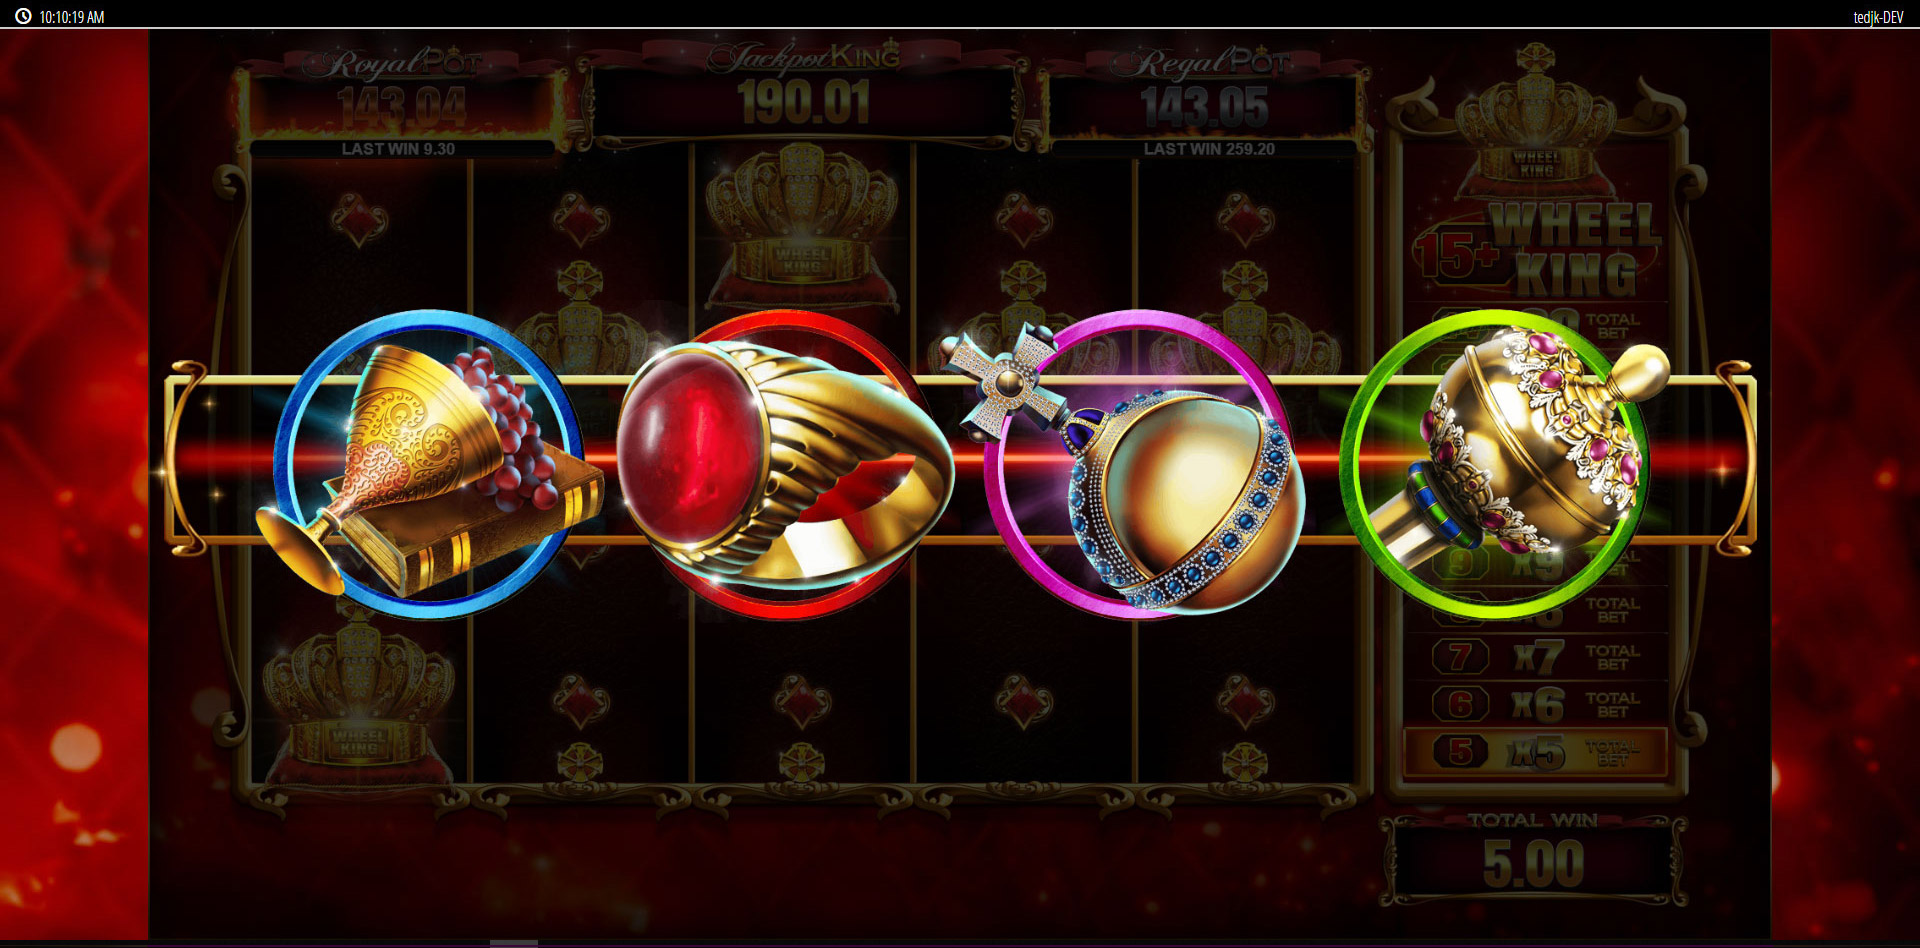 Ted Jackpot King Slots SpinGenie